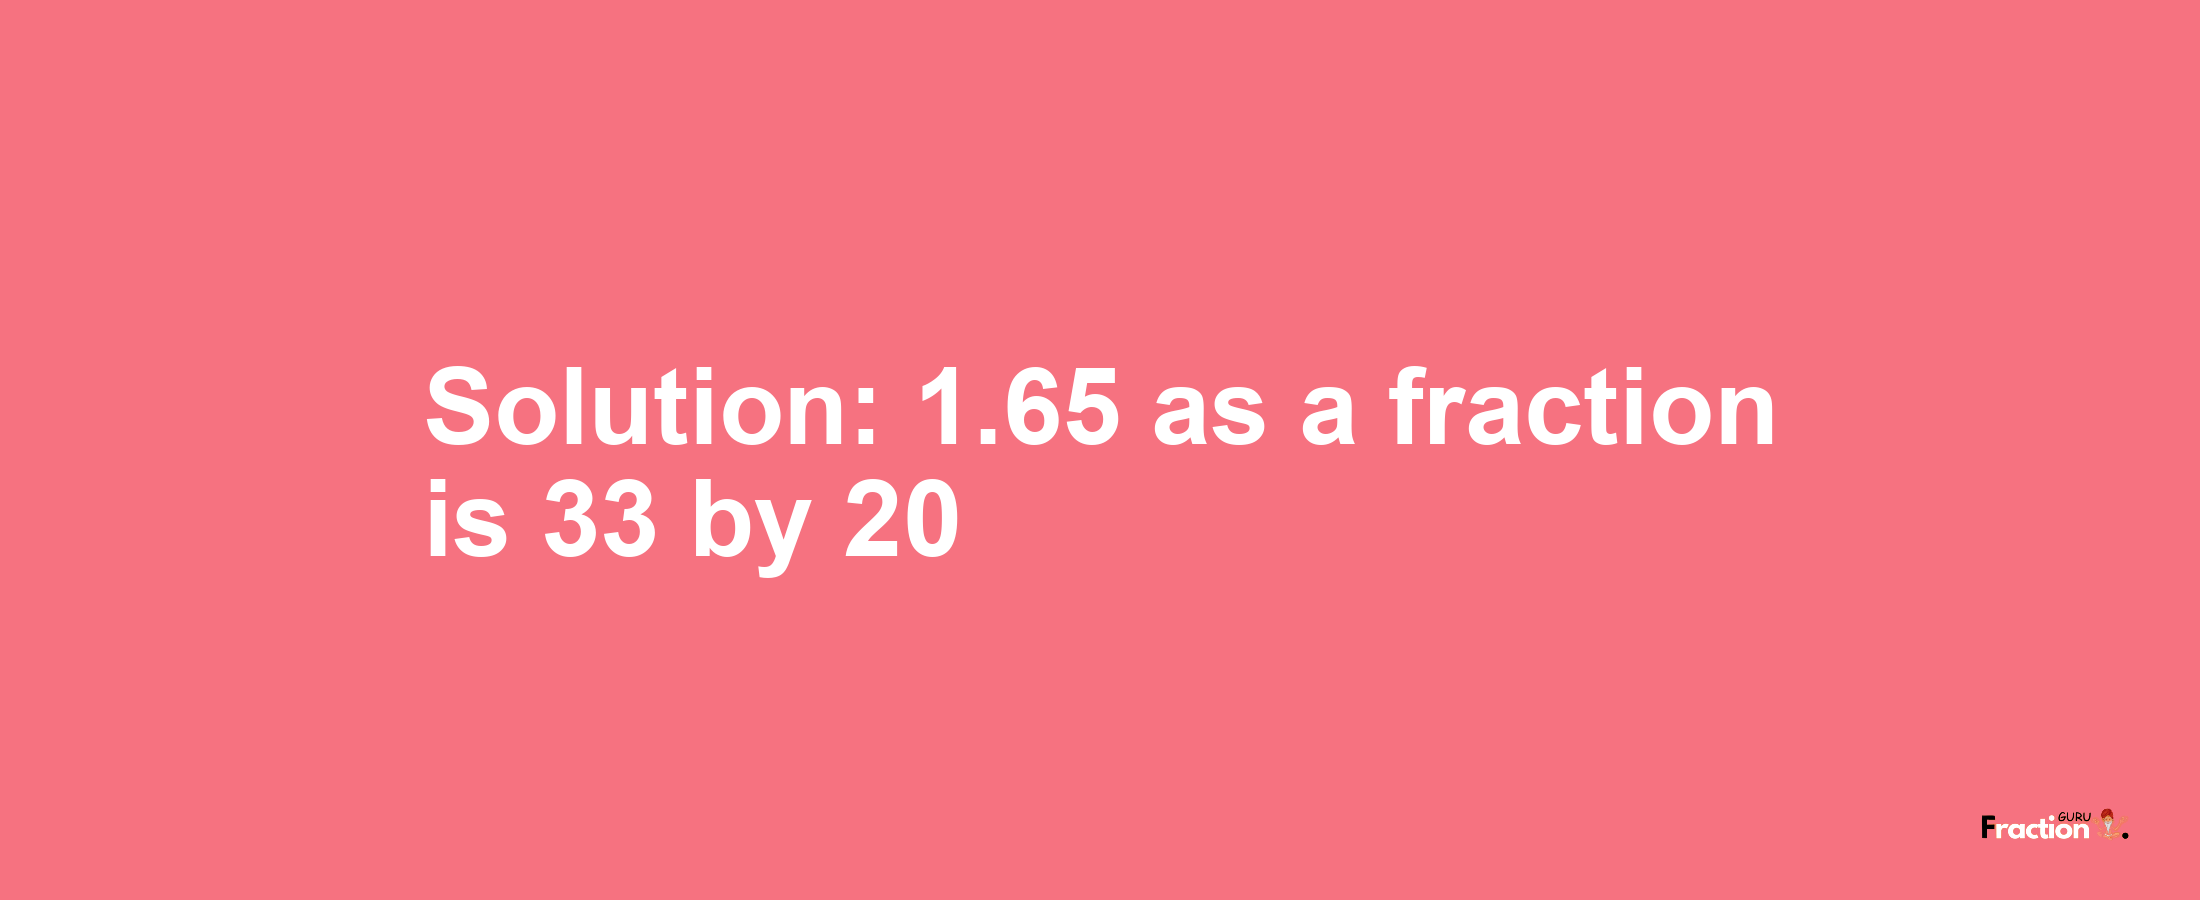 Solution:1.65 as a fraction is 33/20